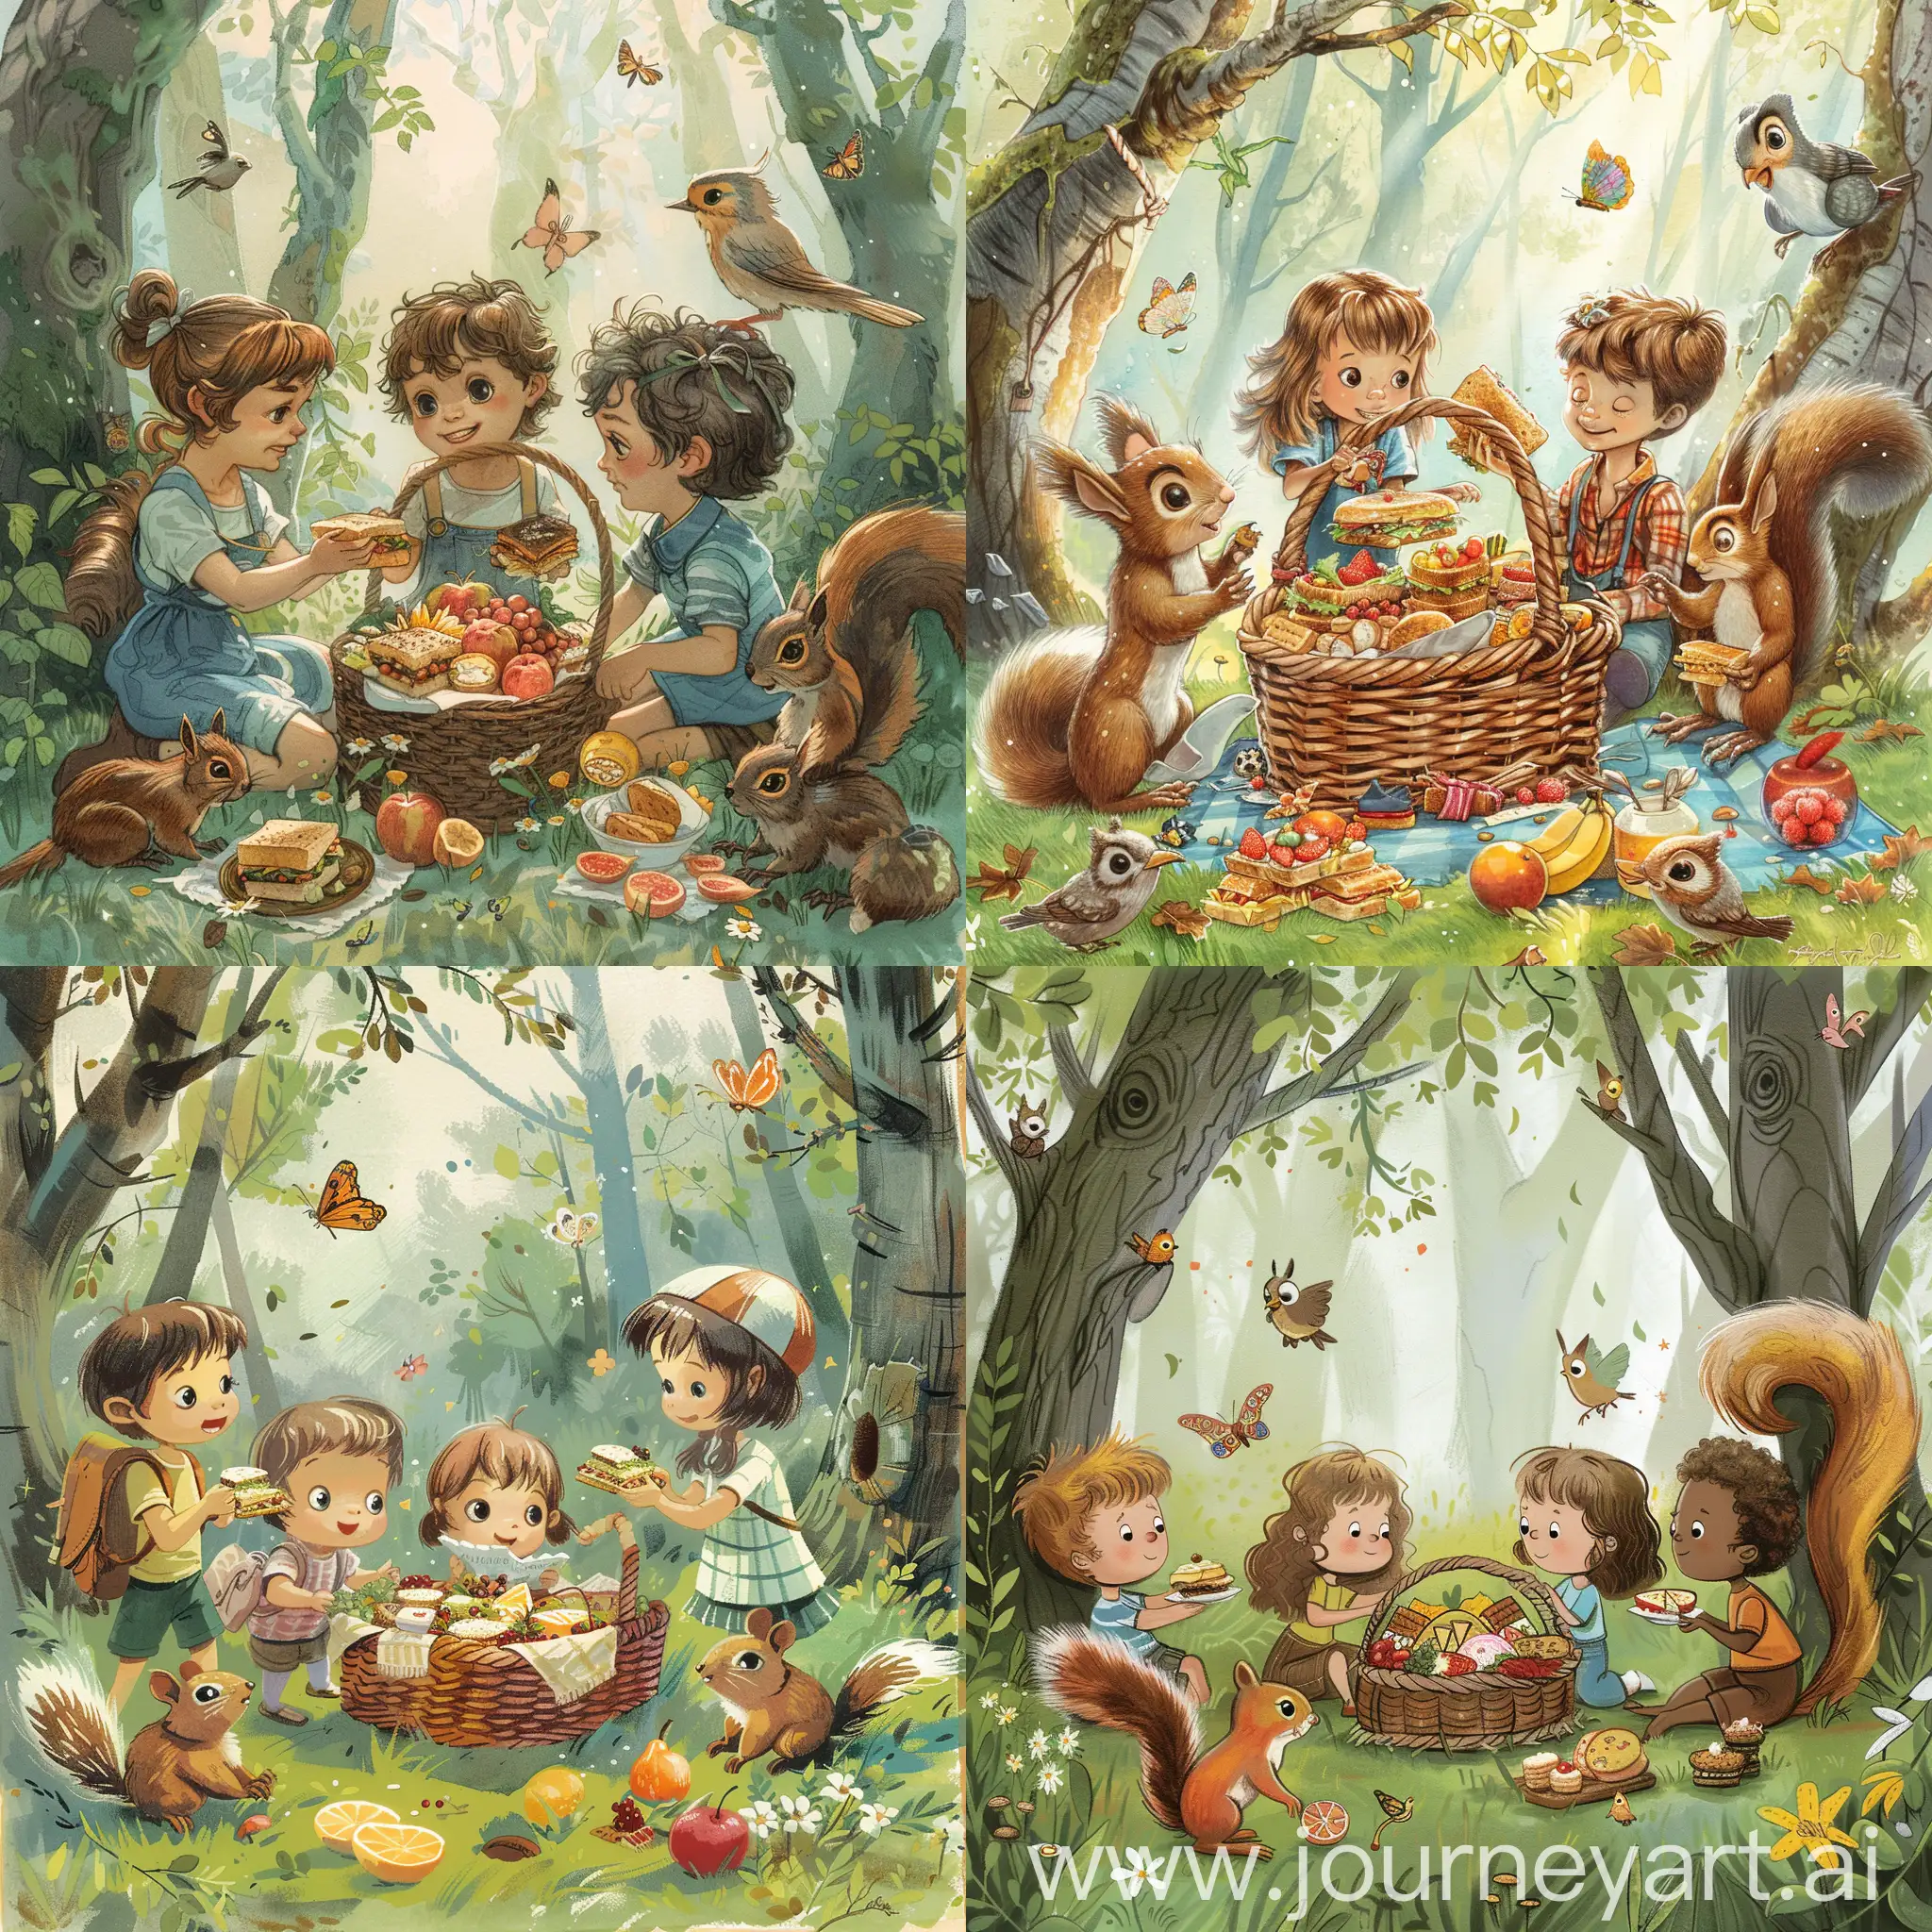 Tommy, Lily, Daisy, and Sunny decide to have a picnic in the enchanted woods near their home. They pack a basket full of delicious sandwiches, fruits, and cookies, and set off on their adventure.

As they journey deeper into the woods, they encounter magical creatures like talking squirrels, singing birds, and friendly butterflies. Each encounter teaches them something new about nature, friendship, and kindness.